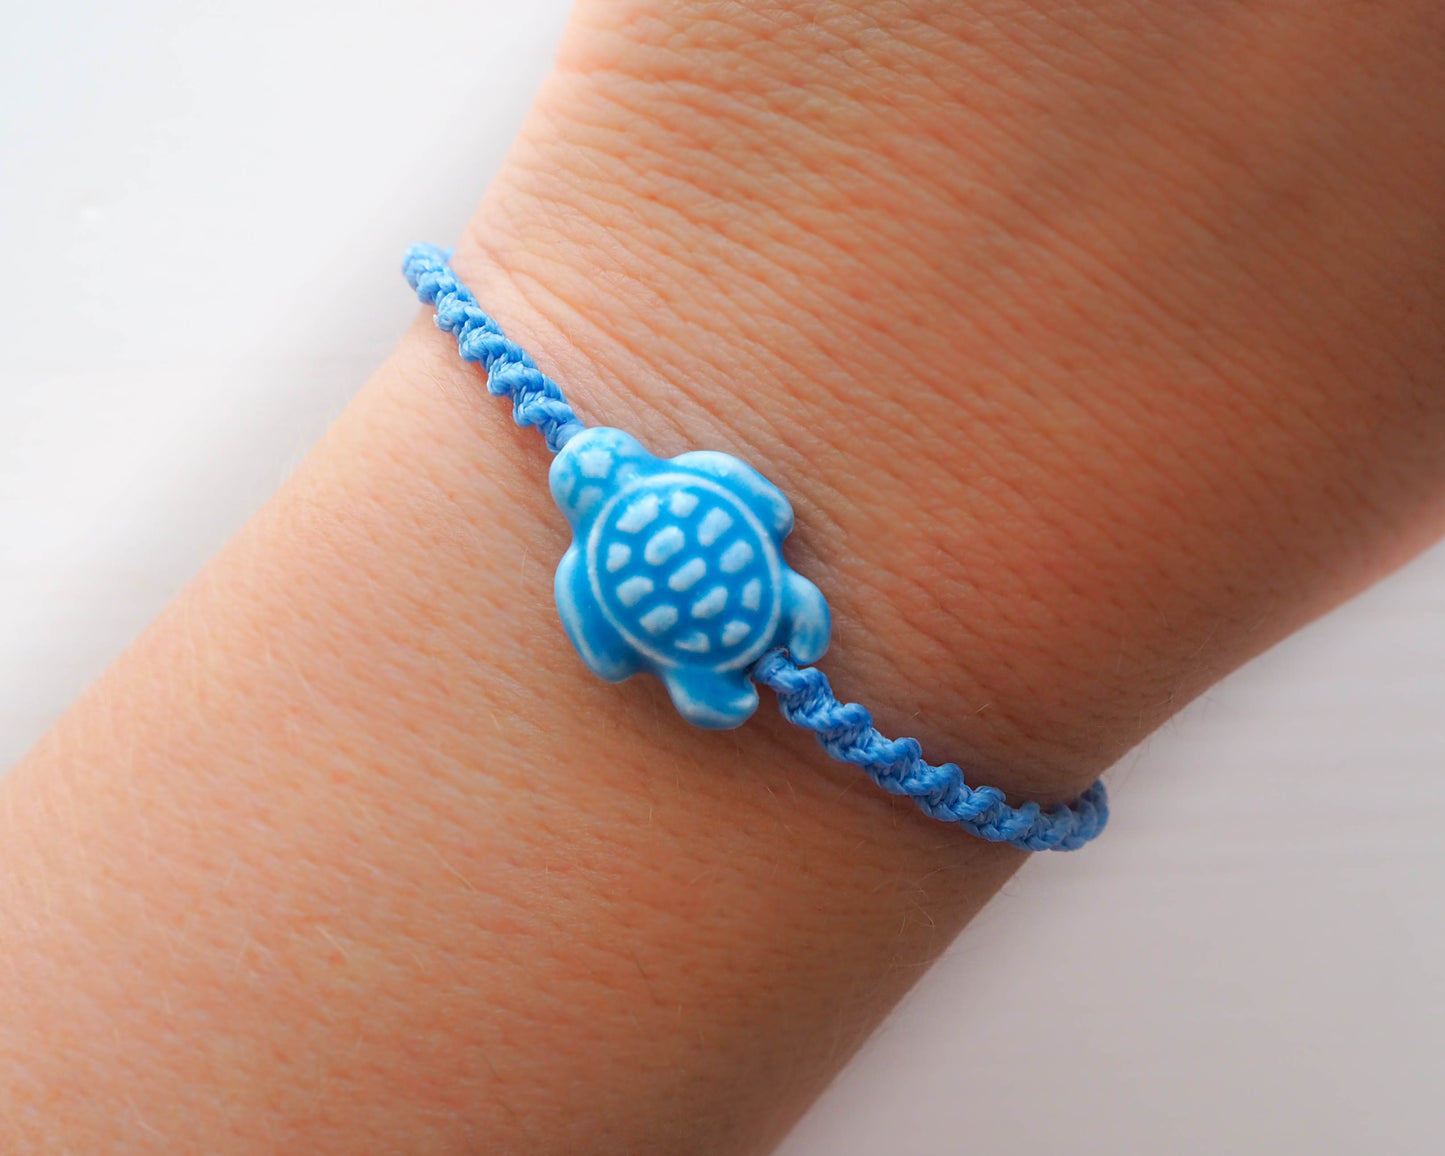 Wearing Blue Ceramic Turtle Bracelet, made with wax cord and wooded beads, handmade in portugal 